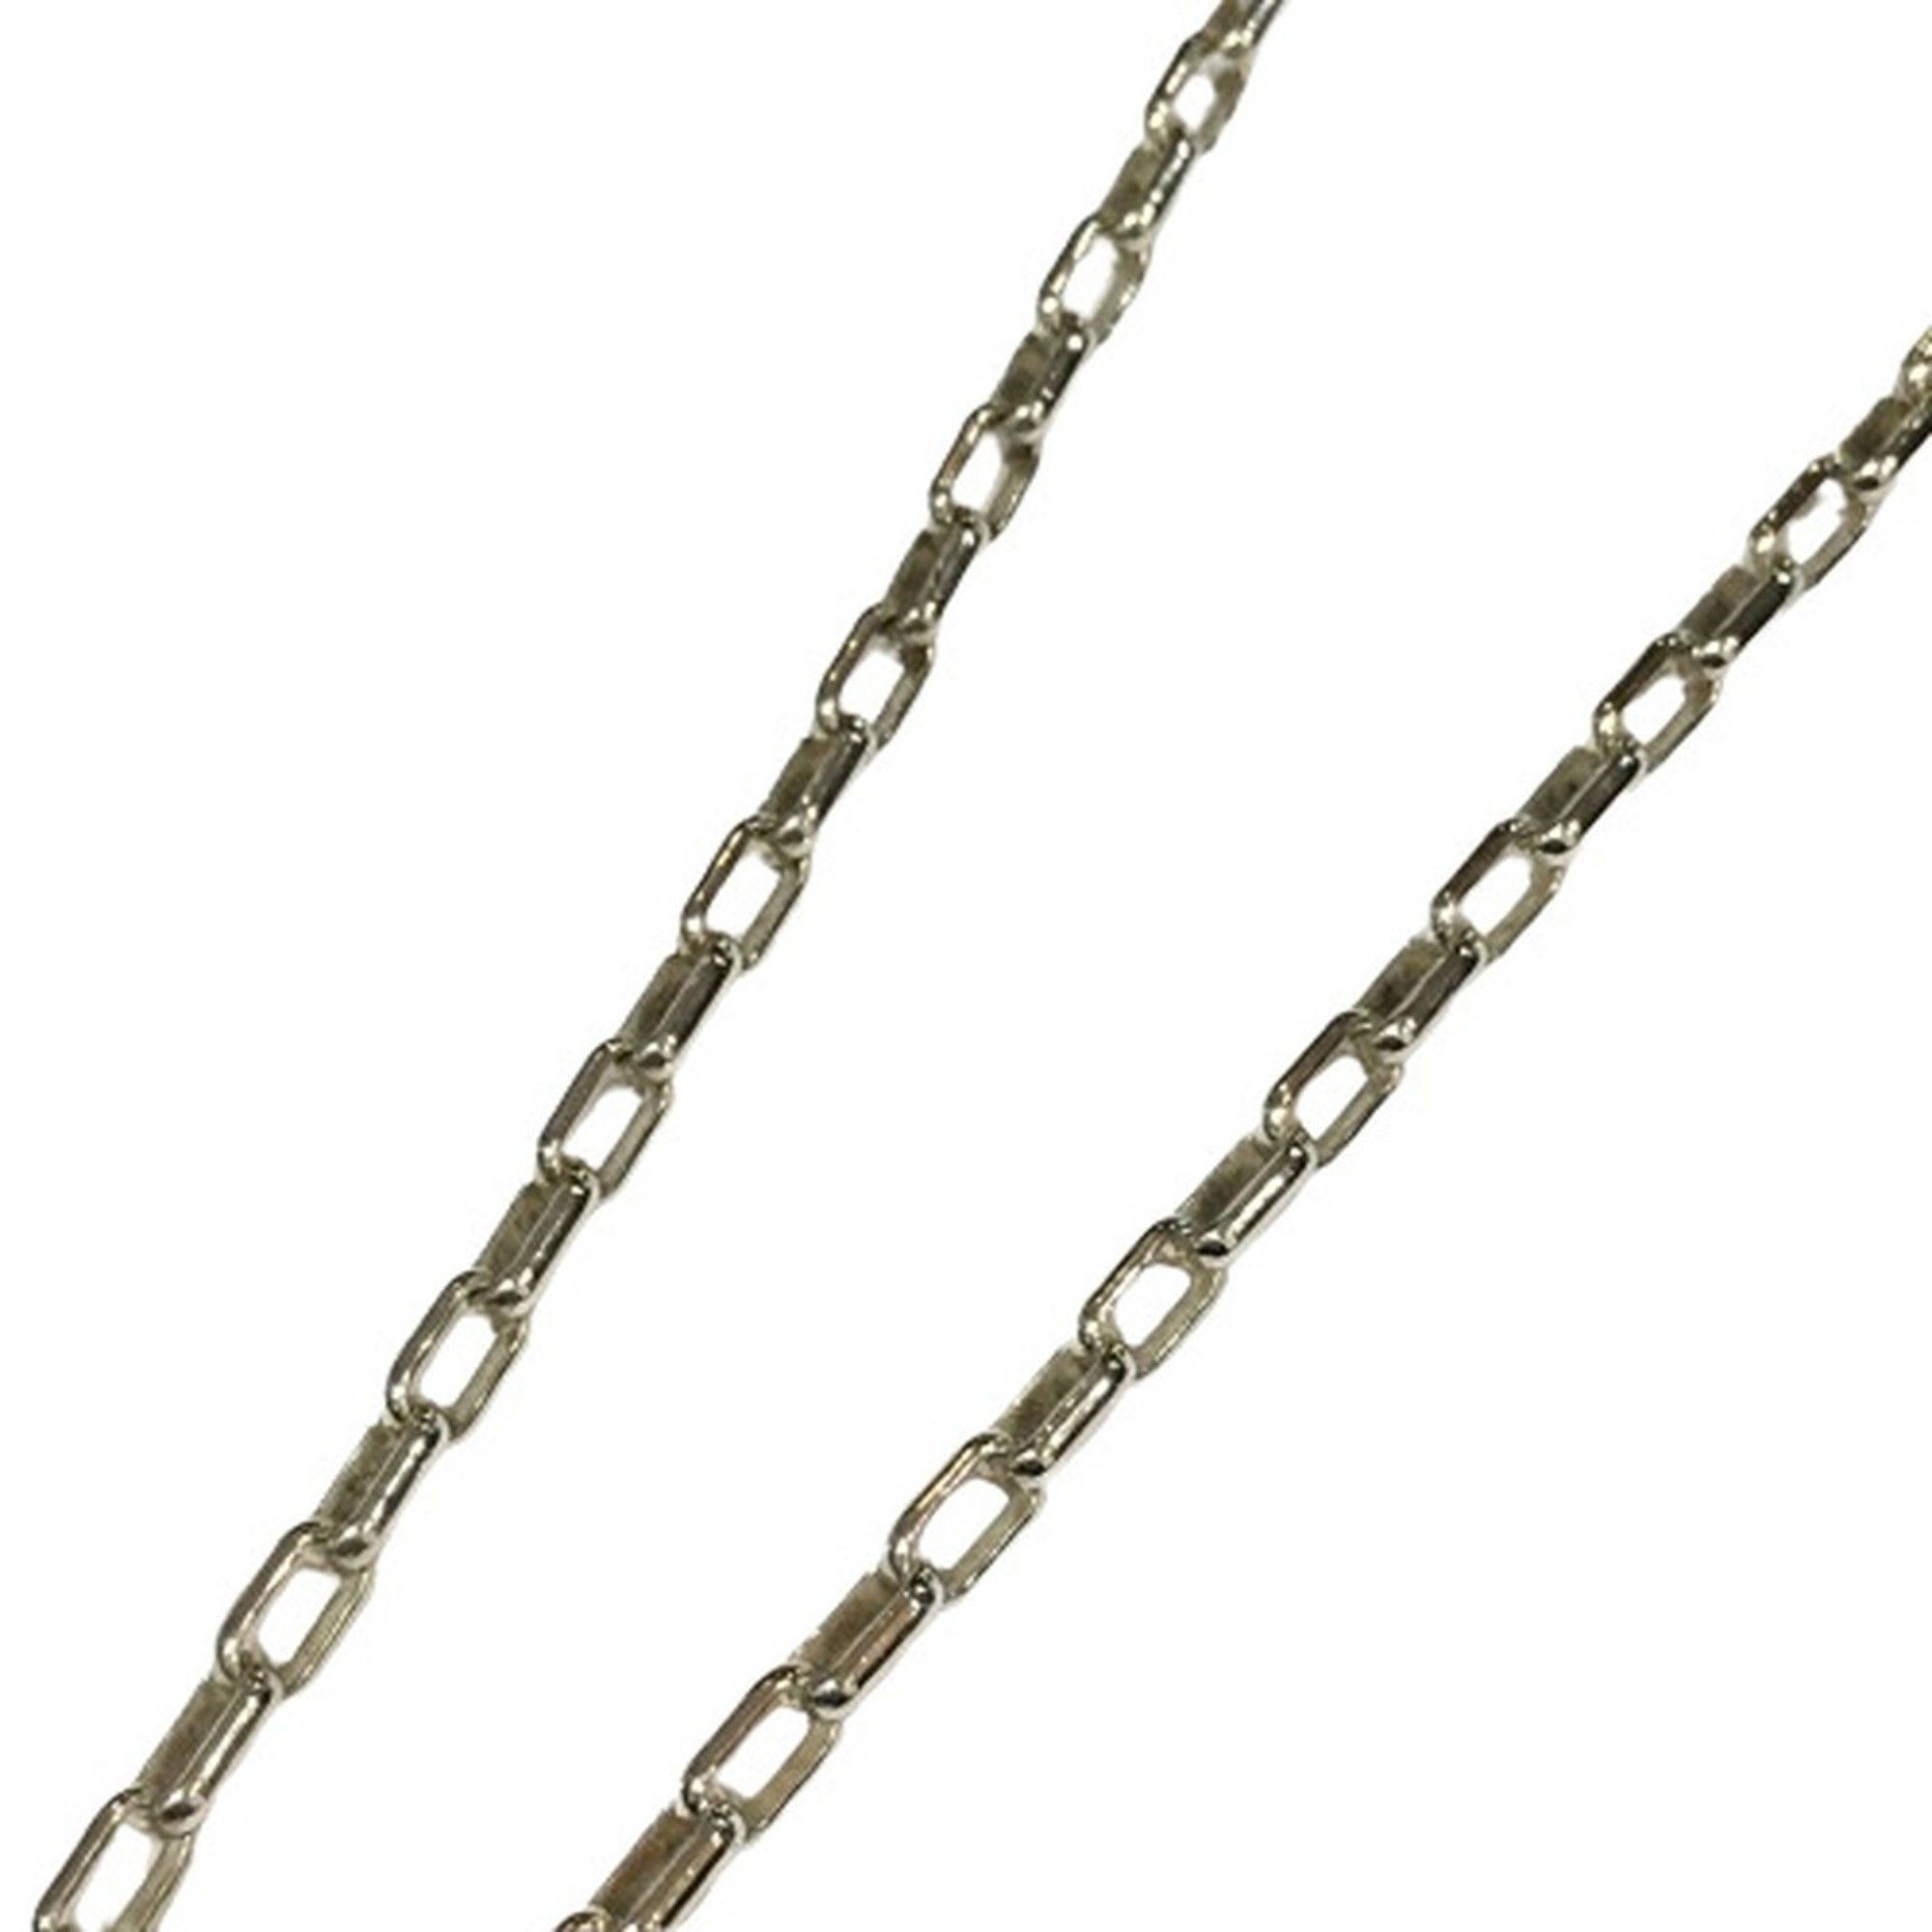 GUCCI Gucci Interlocking G Necklace Ag925 Silver Men's Women's Accessories ITYL6A7N76PY RM1054D